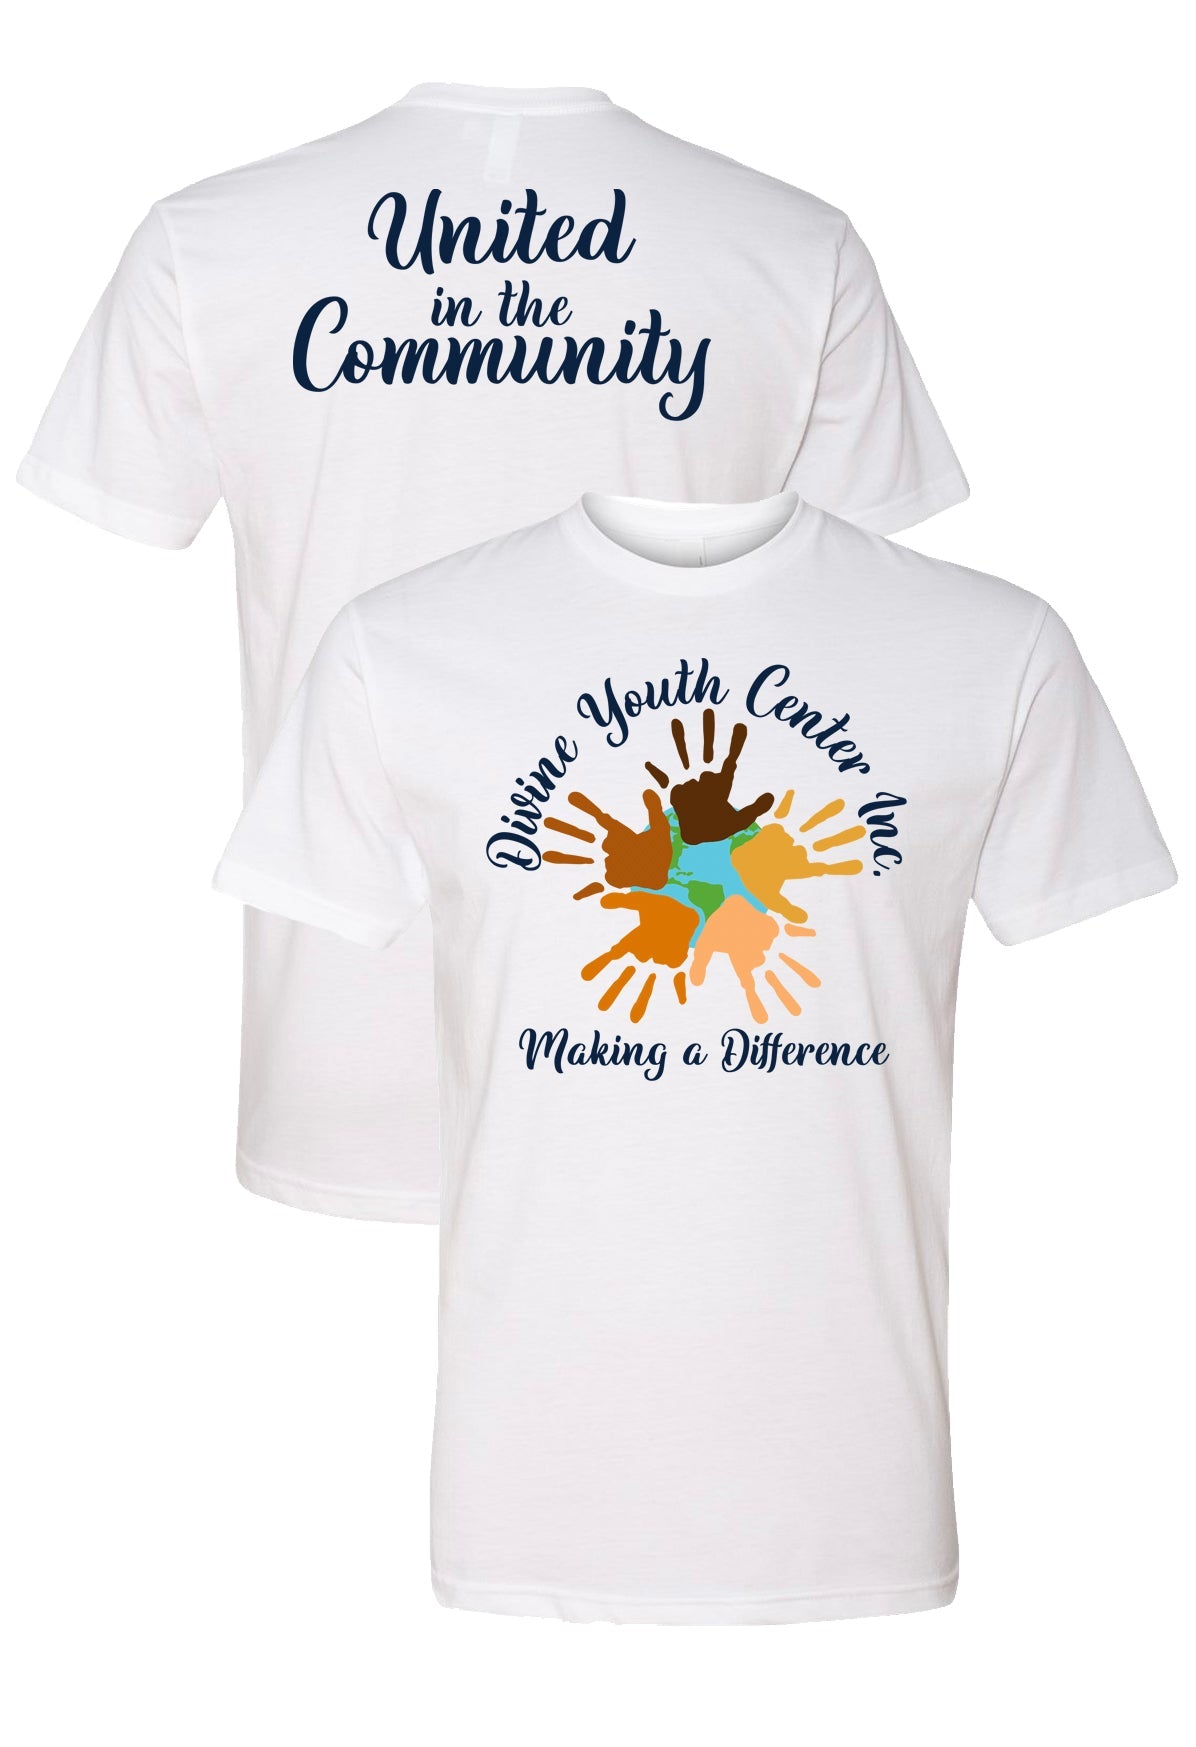 Divine Youth Center Youth T Shirts - Mato & Hash